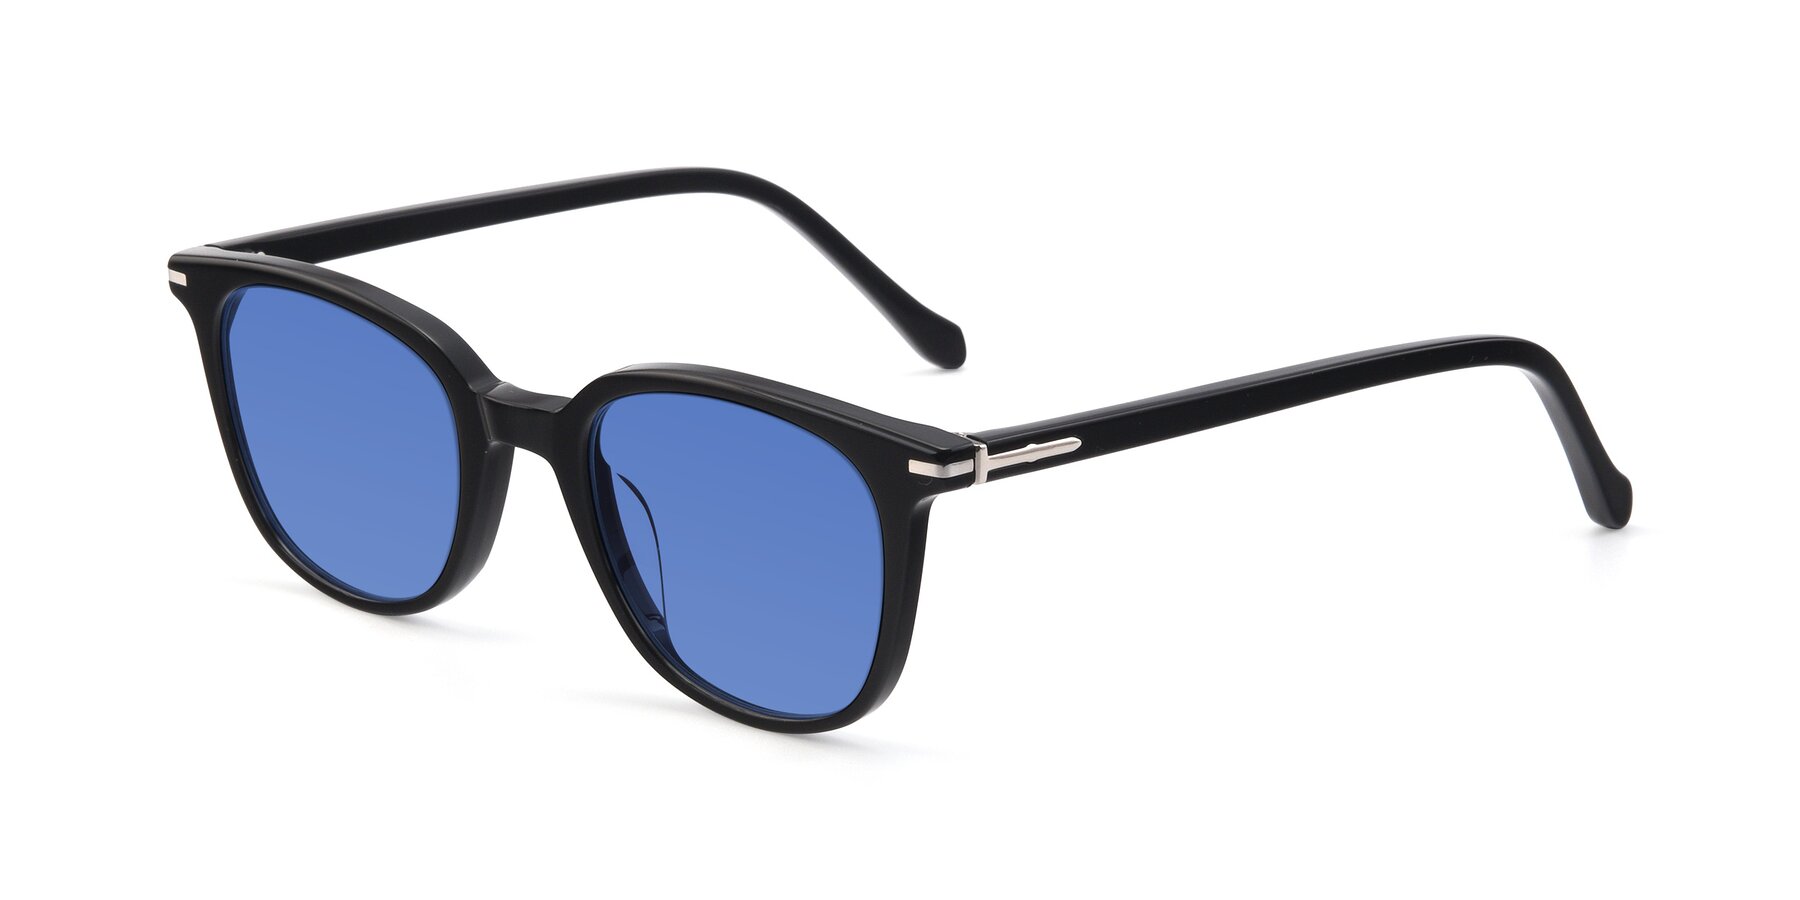 Angle of 17562 in Black with Blue Tinted Lenses